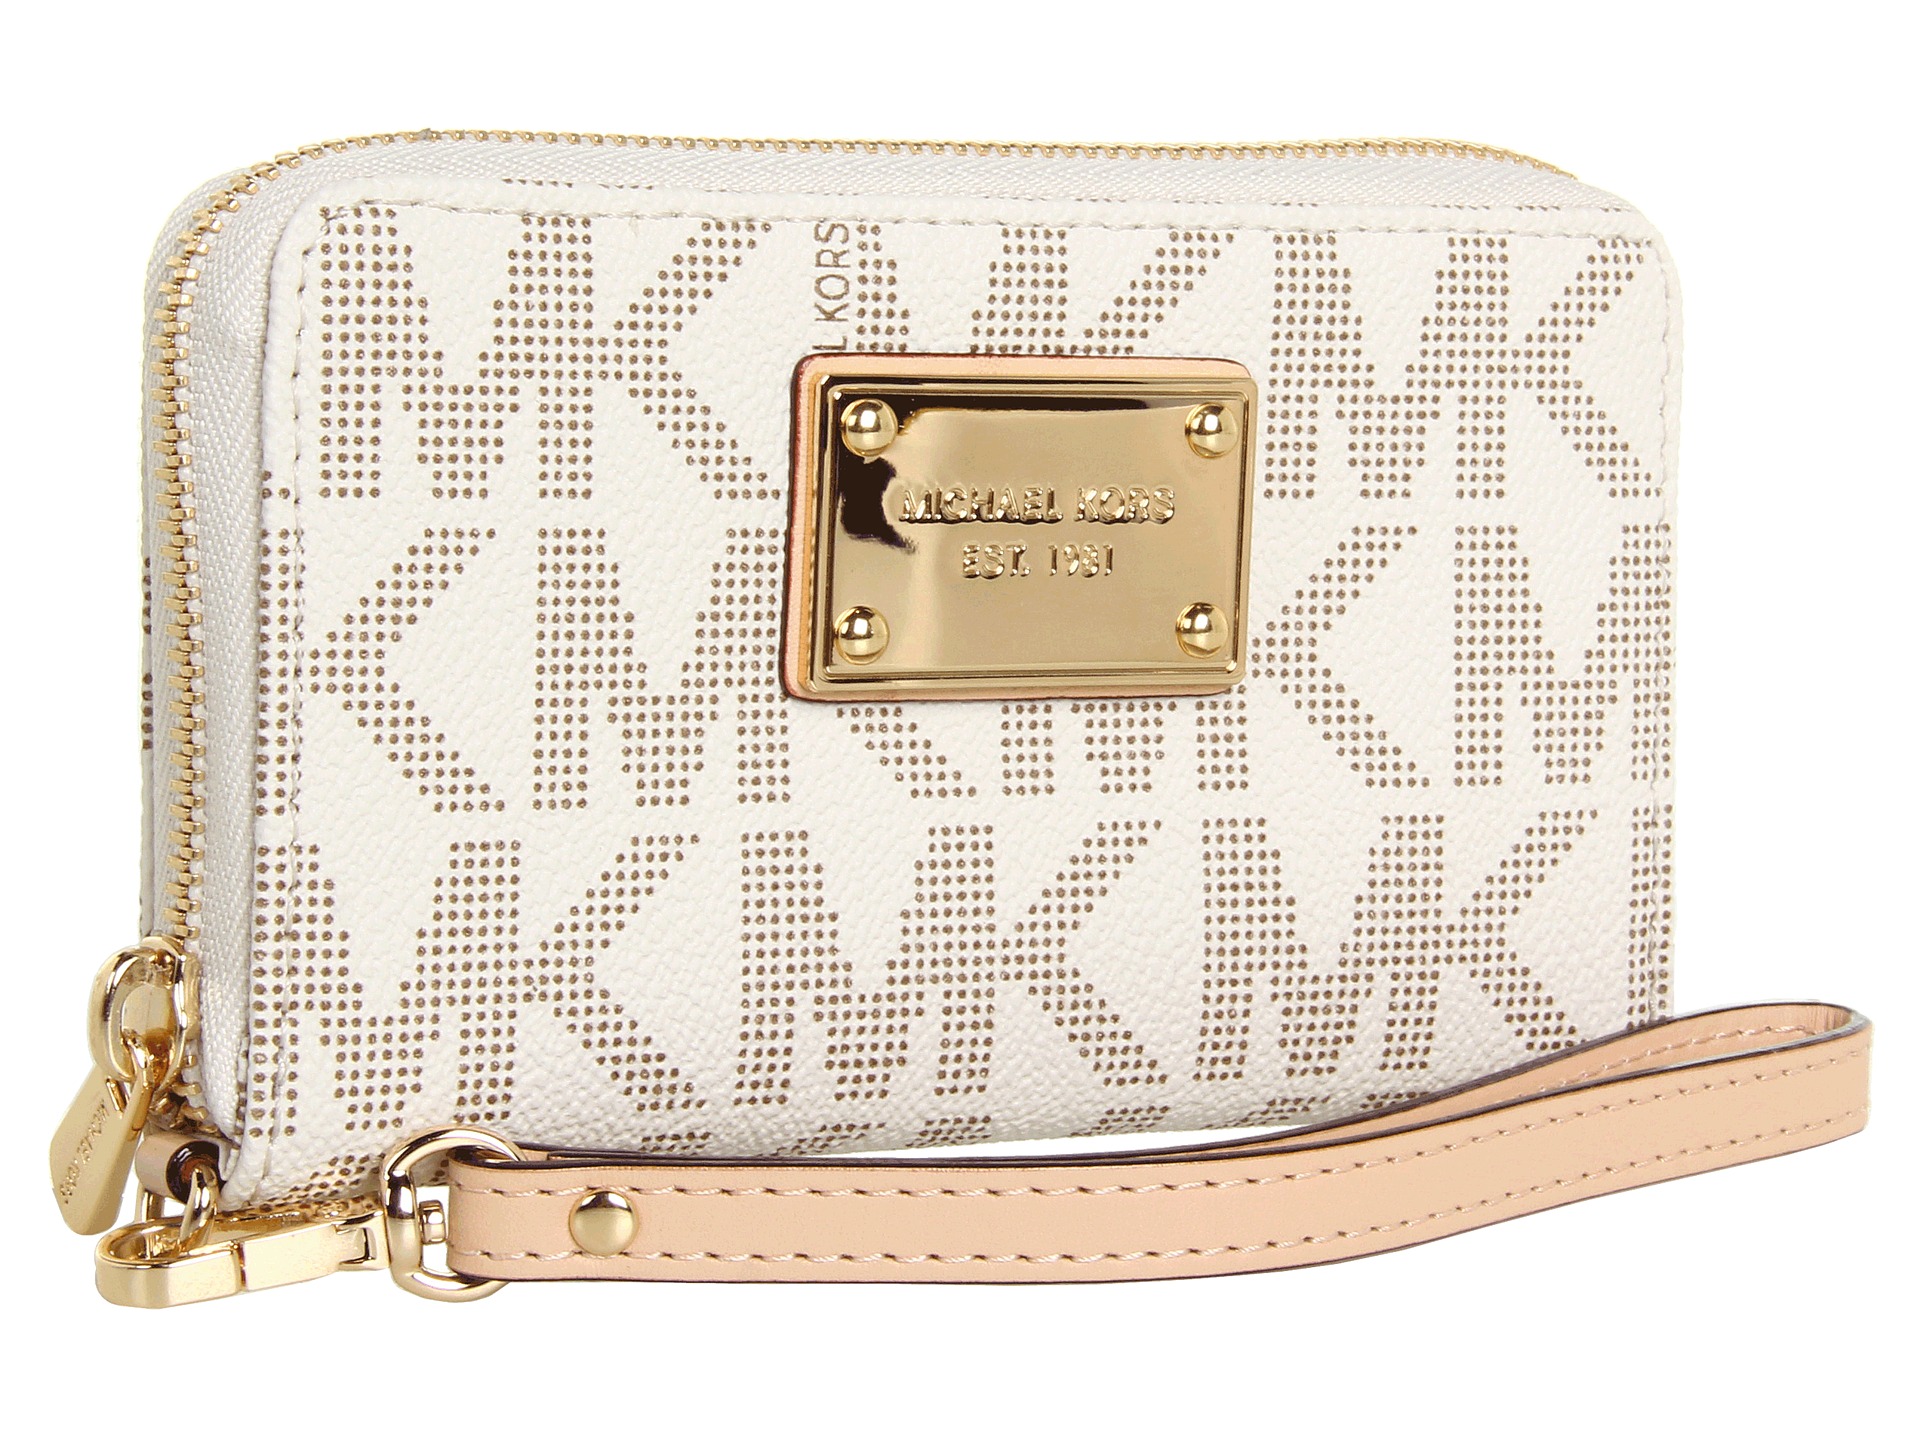 Michael Michael Kors Saffiano Multifunction Case | Shipped Free at Zappos